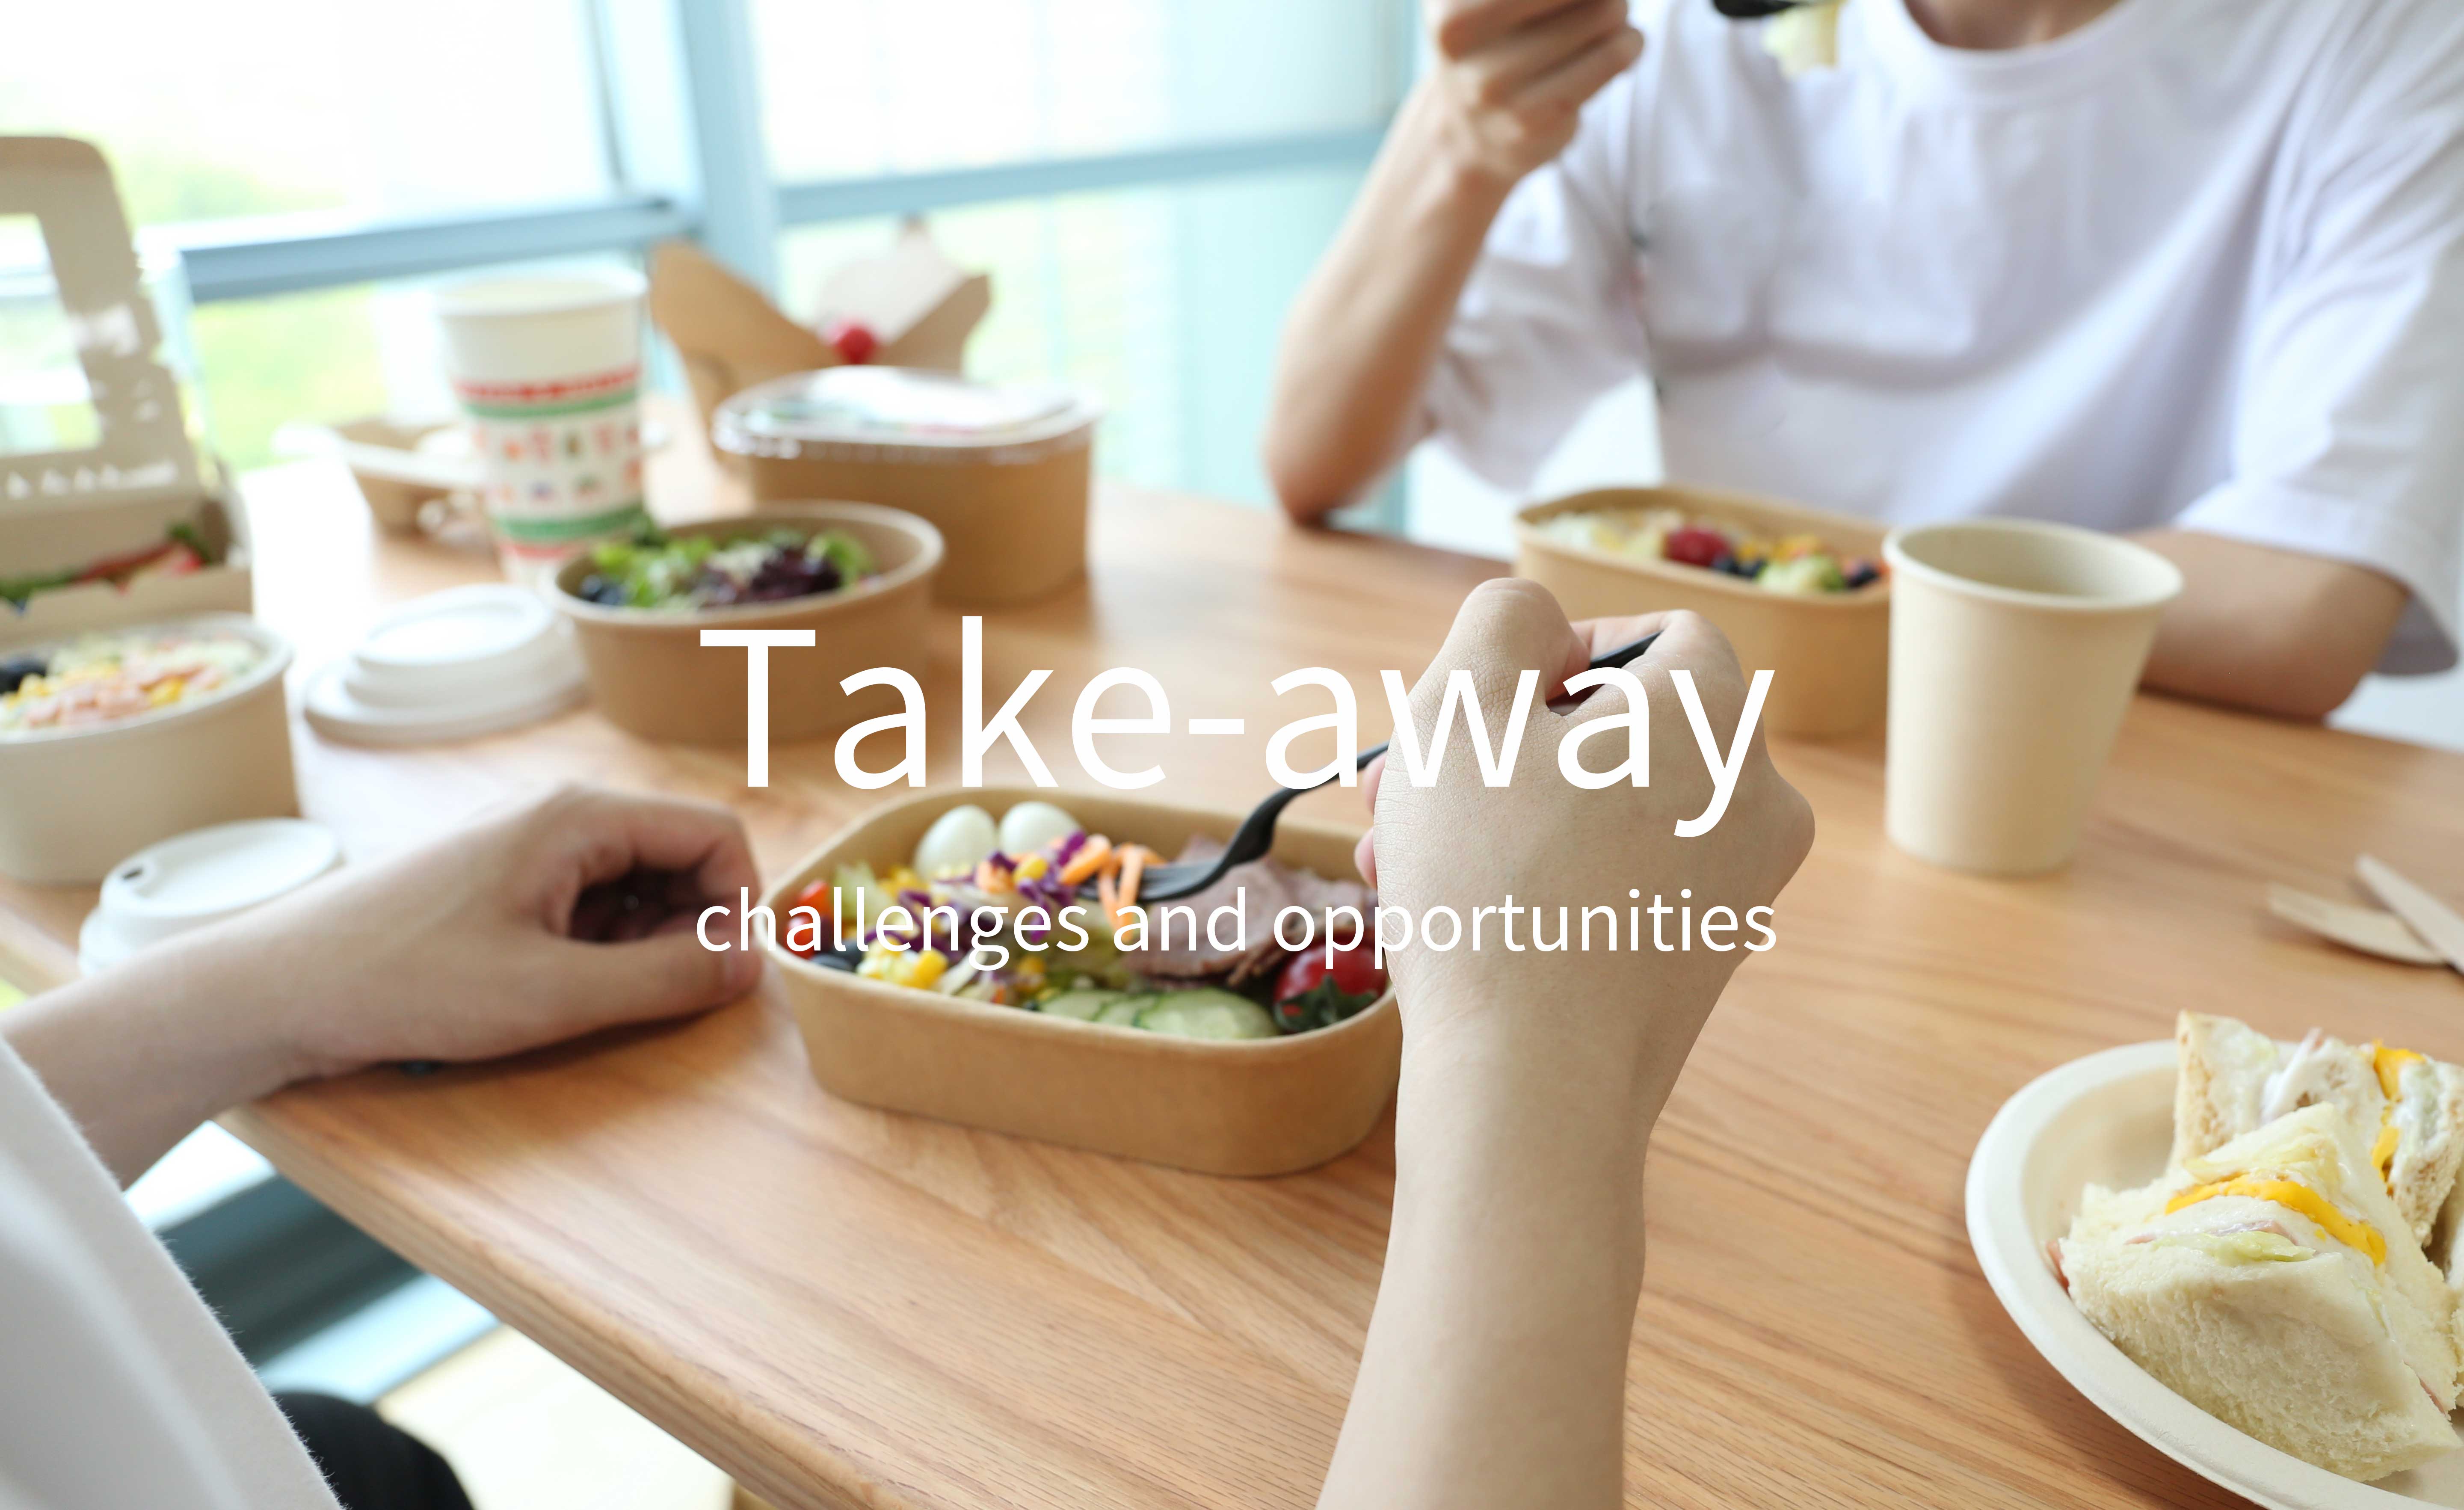 What are the challenges and opportunities facing take-away food packaging?